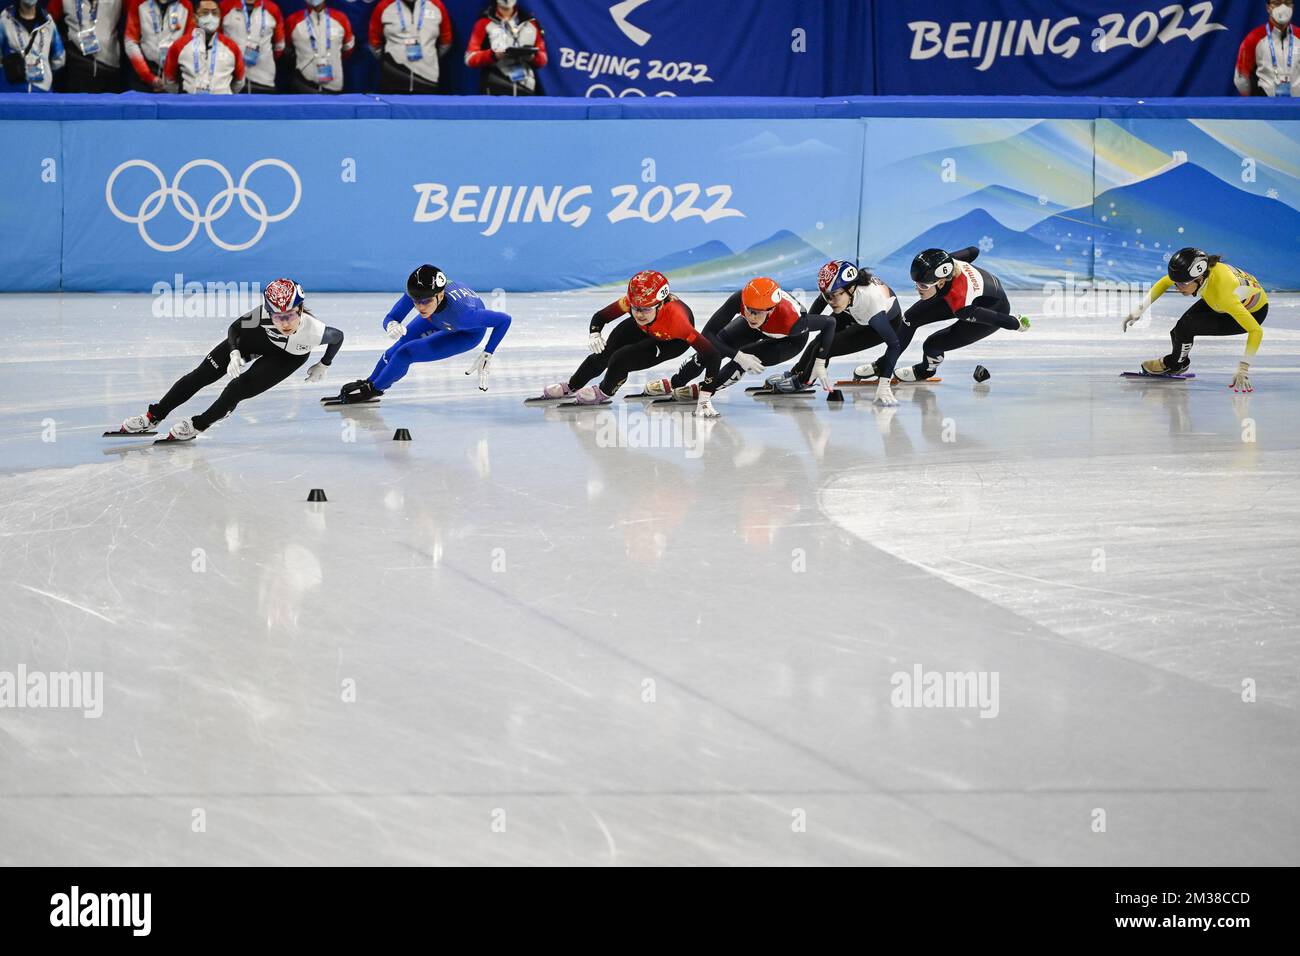 Belgian shorttrack skater Hanne Desmet (R) pictured in action during the women's Shorttrack 1500m A-final at the Beijing 2022 Winter Olympics in Beijing, China, Wednesday 16 February 2022. The winter Olympics are taking place from 4 February to 20 February 2022. BELGA PHOTO LAURIE DIEFFEMBACQ Stock Photo